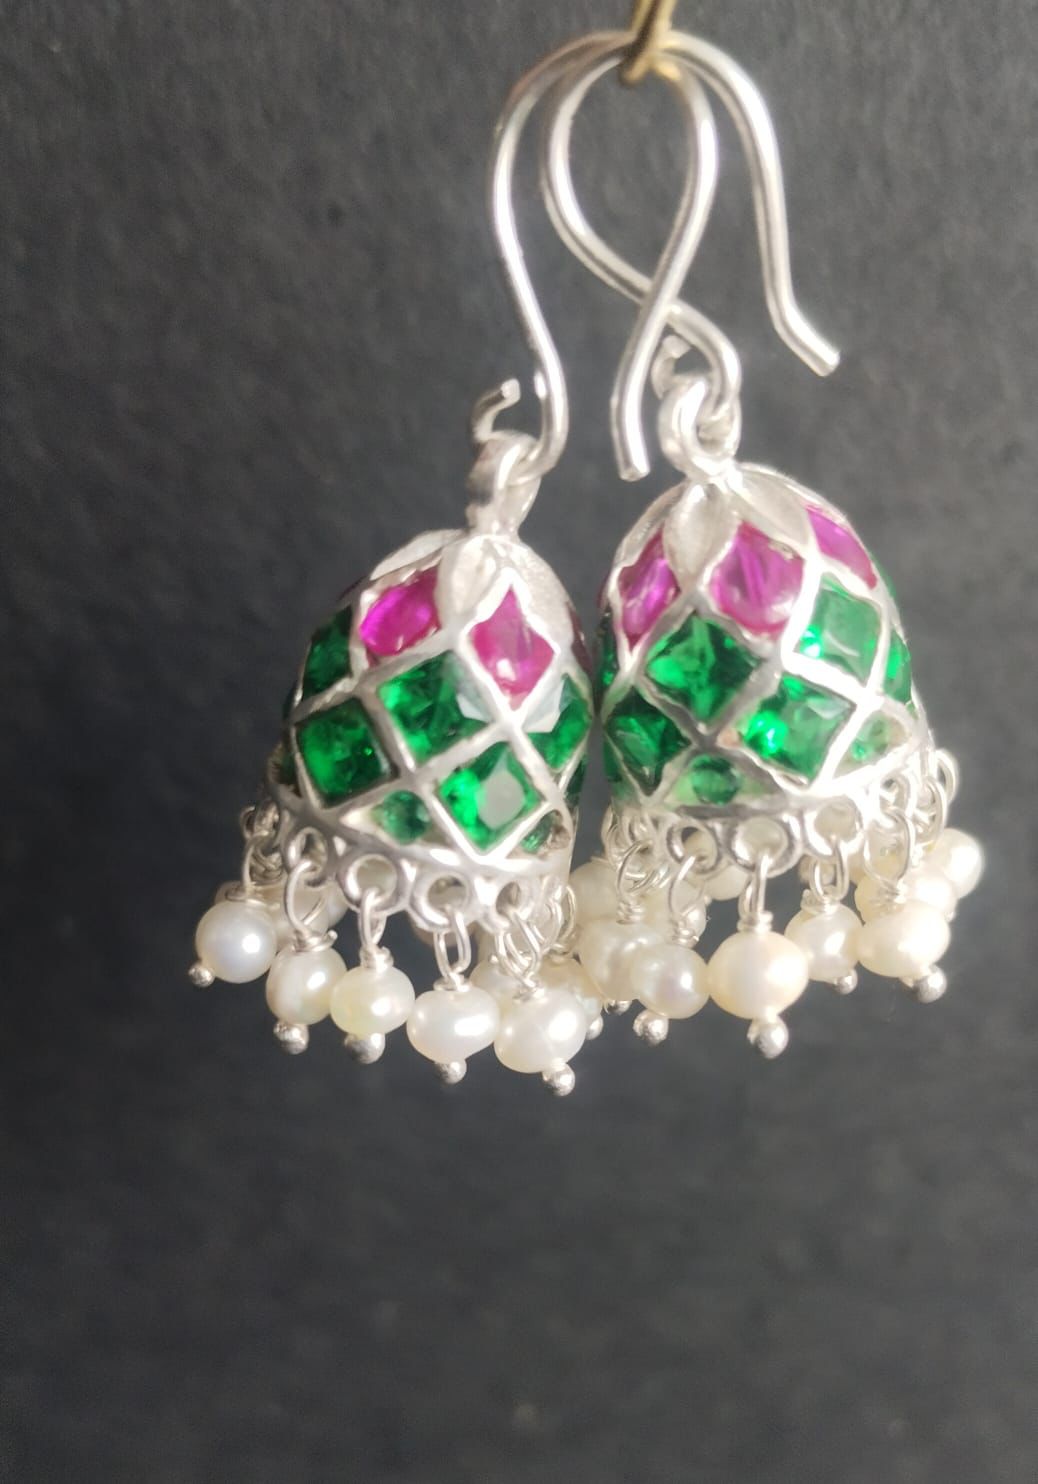 Sterling Silver hook earrings with red and green crystals, pearl drops.